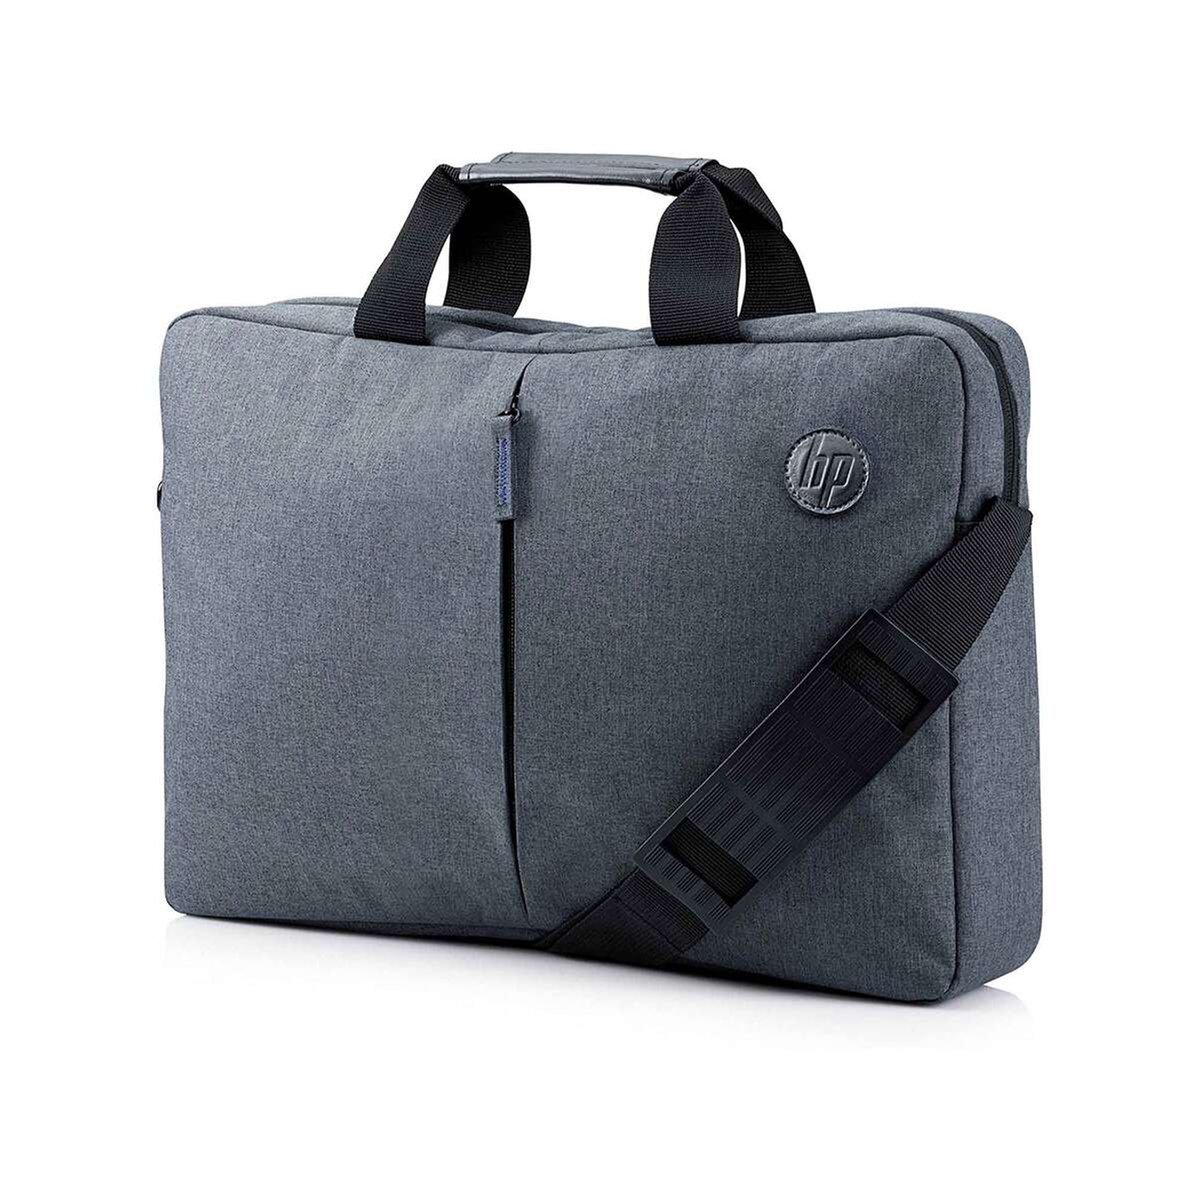 HP Notebook Bag K0B38AA + Mouse 150 - Assorted Color